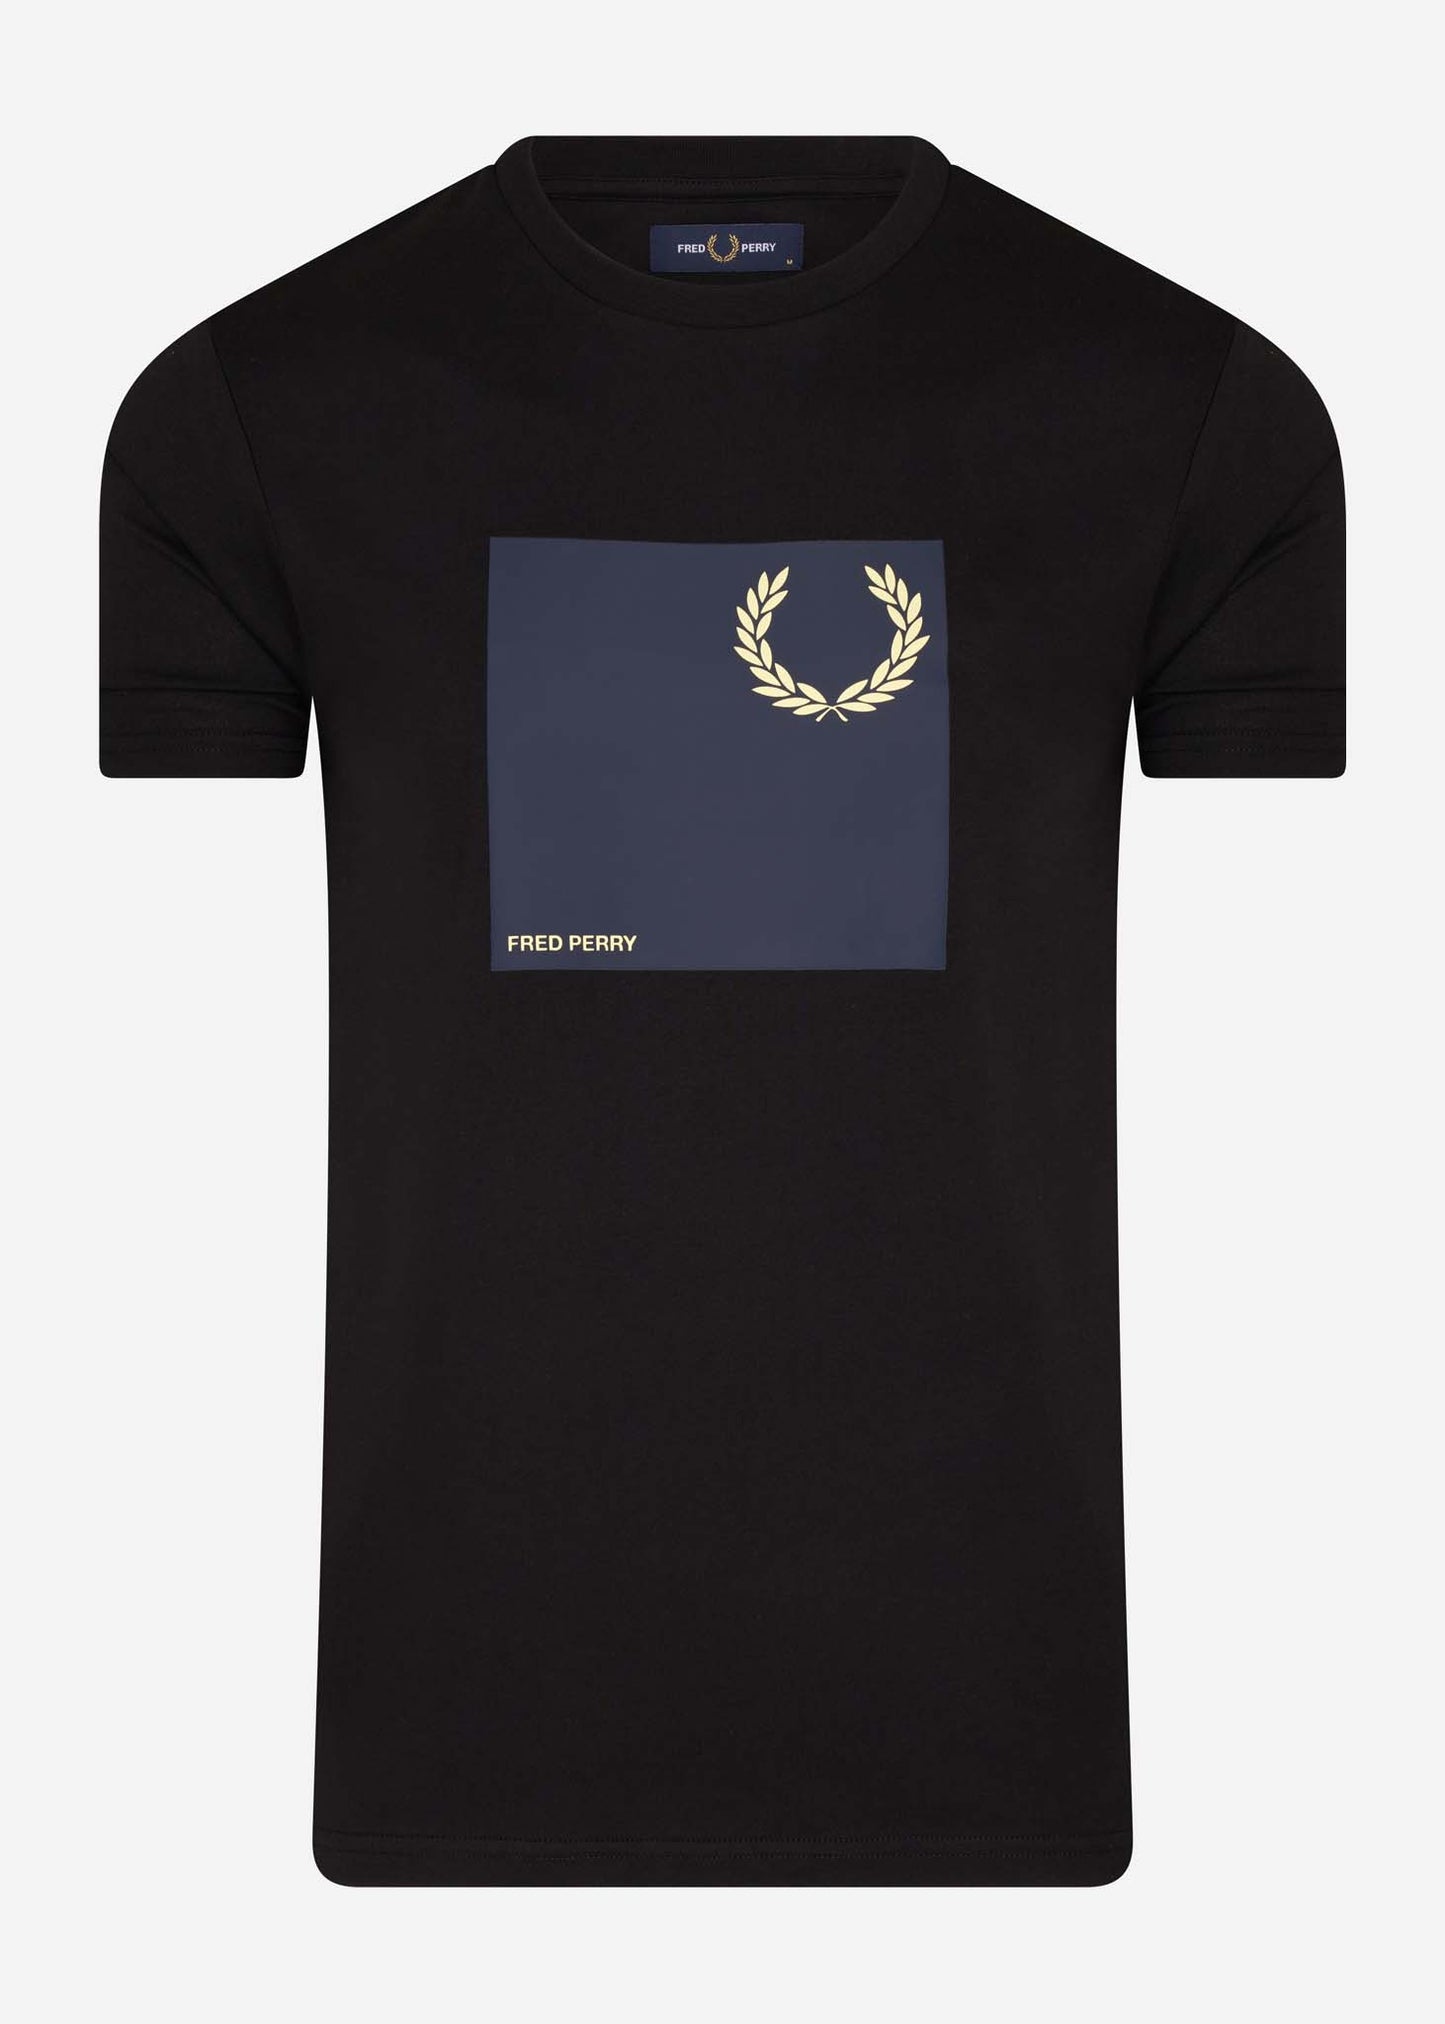 Fred Perry T-shirts  Laurel wreath graphic t-shirt q2 - black 